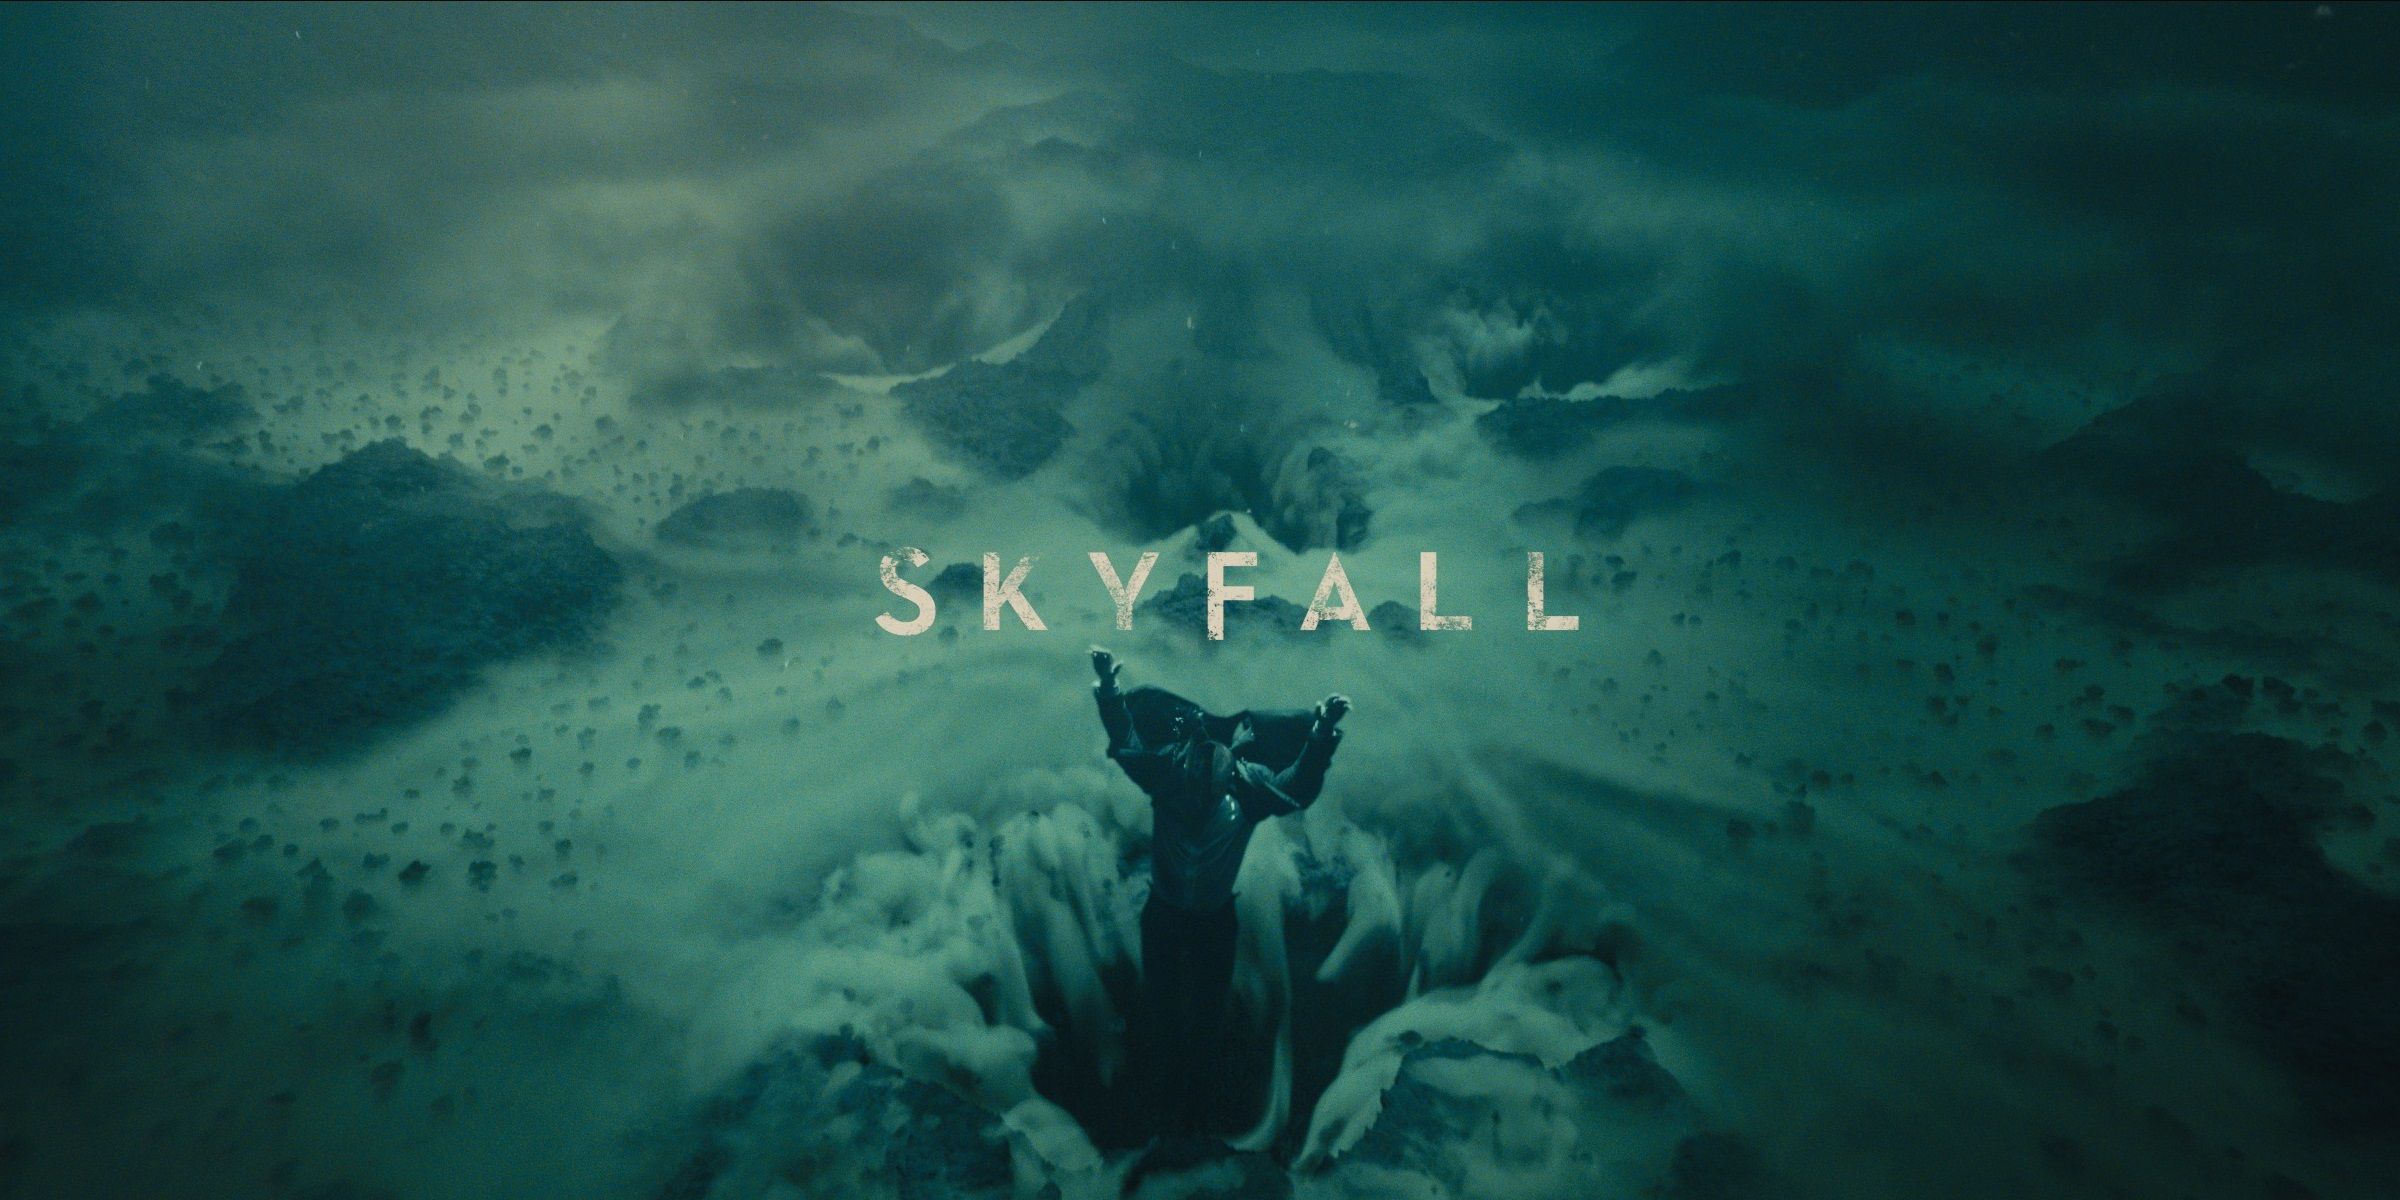 The opening titles of Skyfall